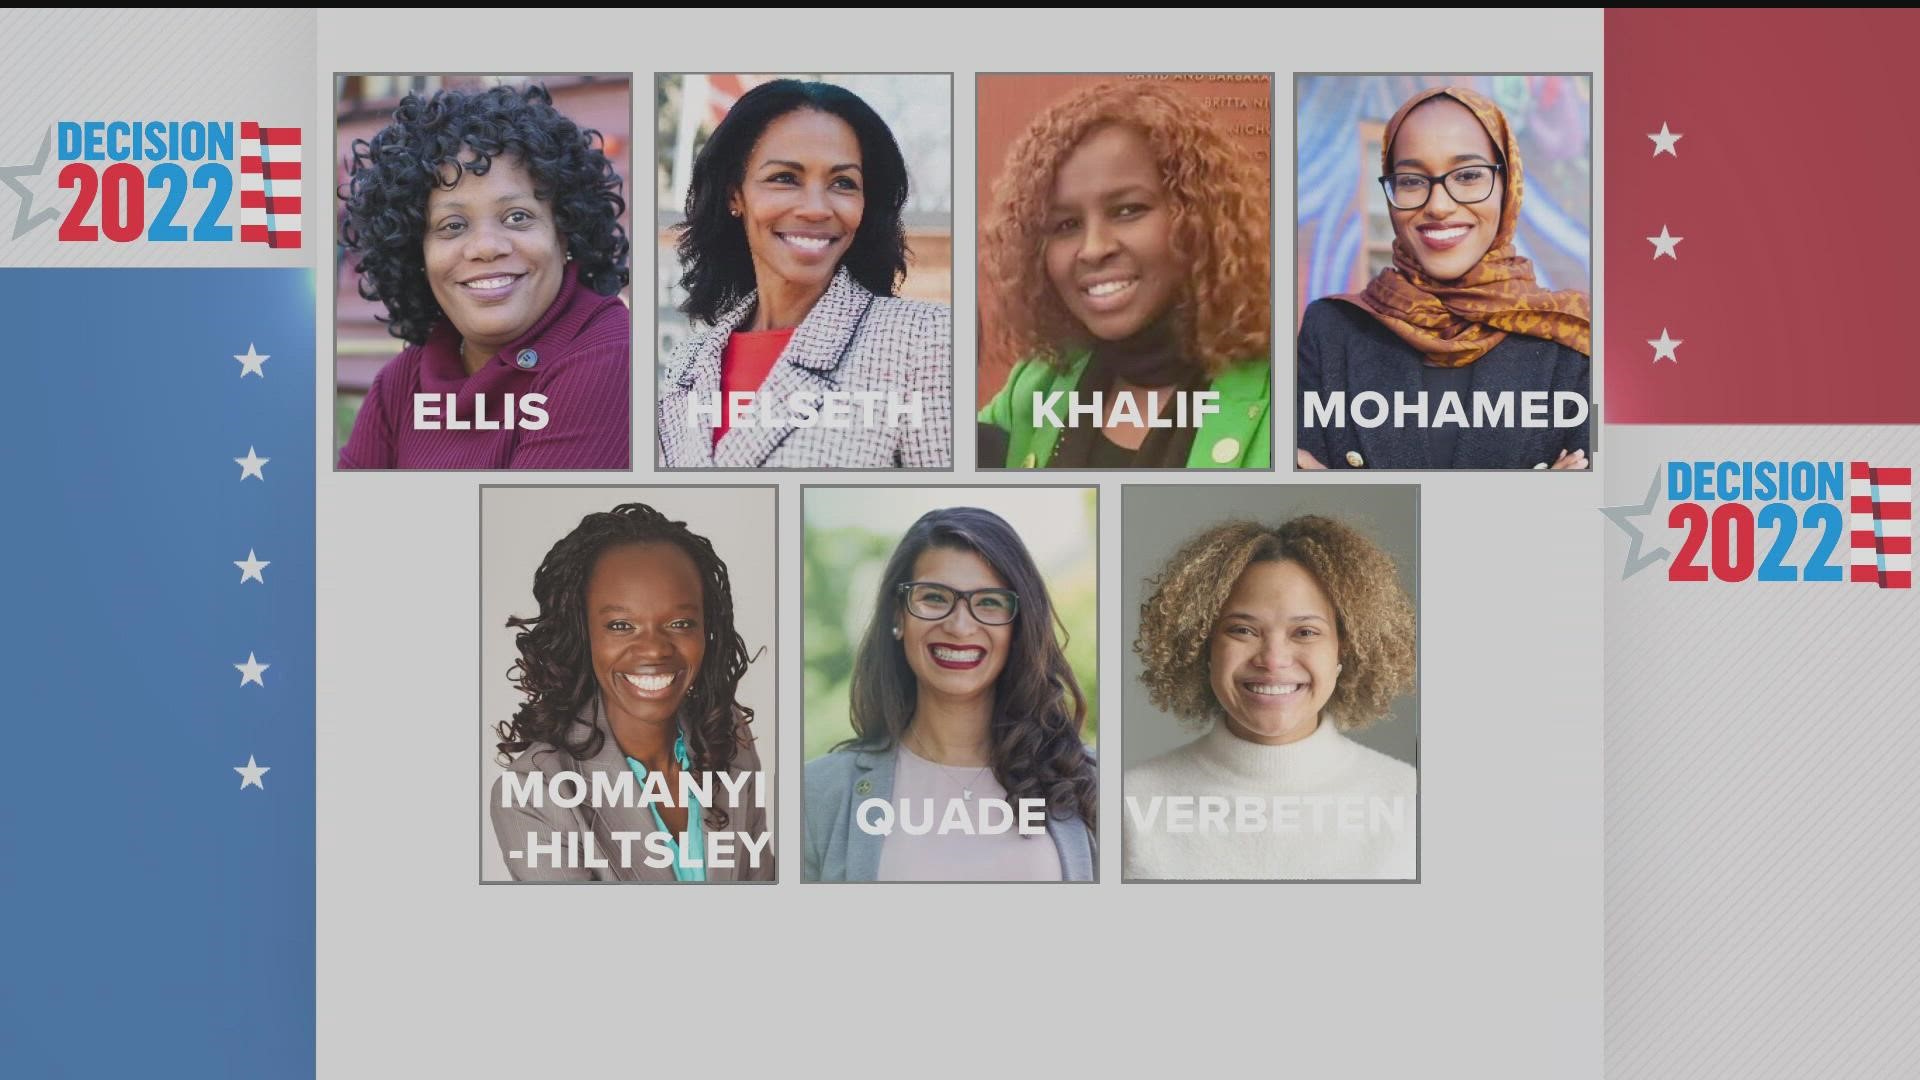 At least seven candidates are looking to make history by becoming the first Black woman -- or women -- to ever serve in the Minnesota Senate.